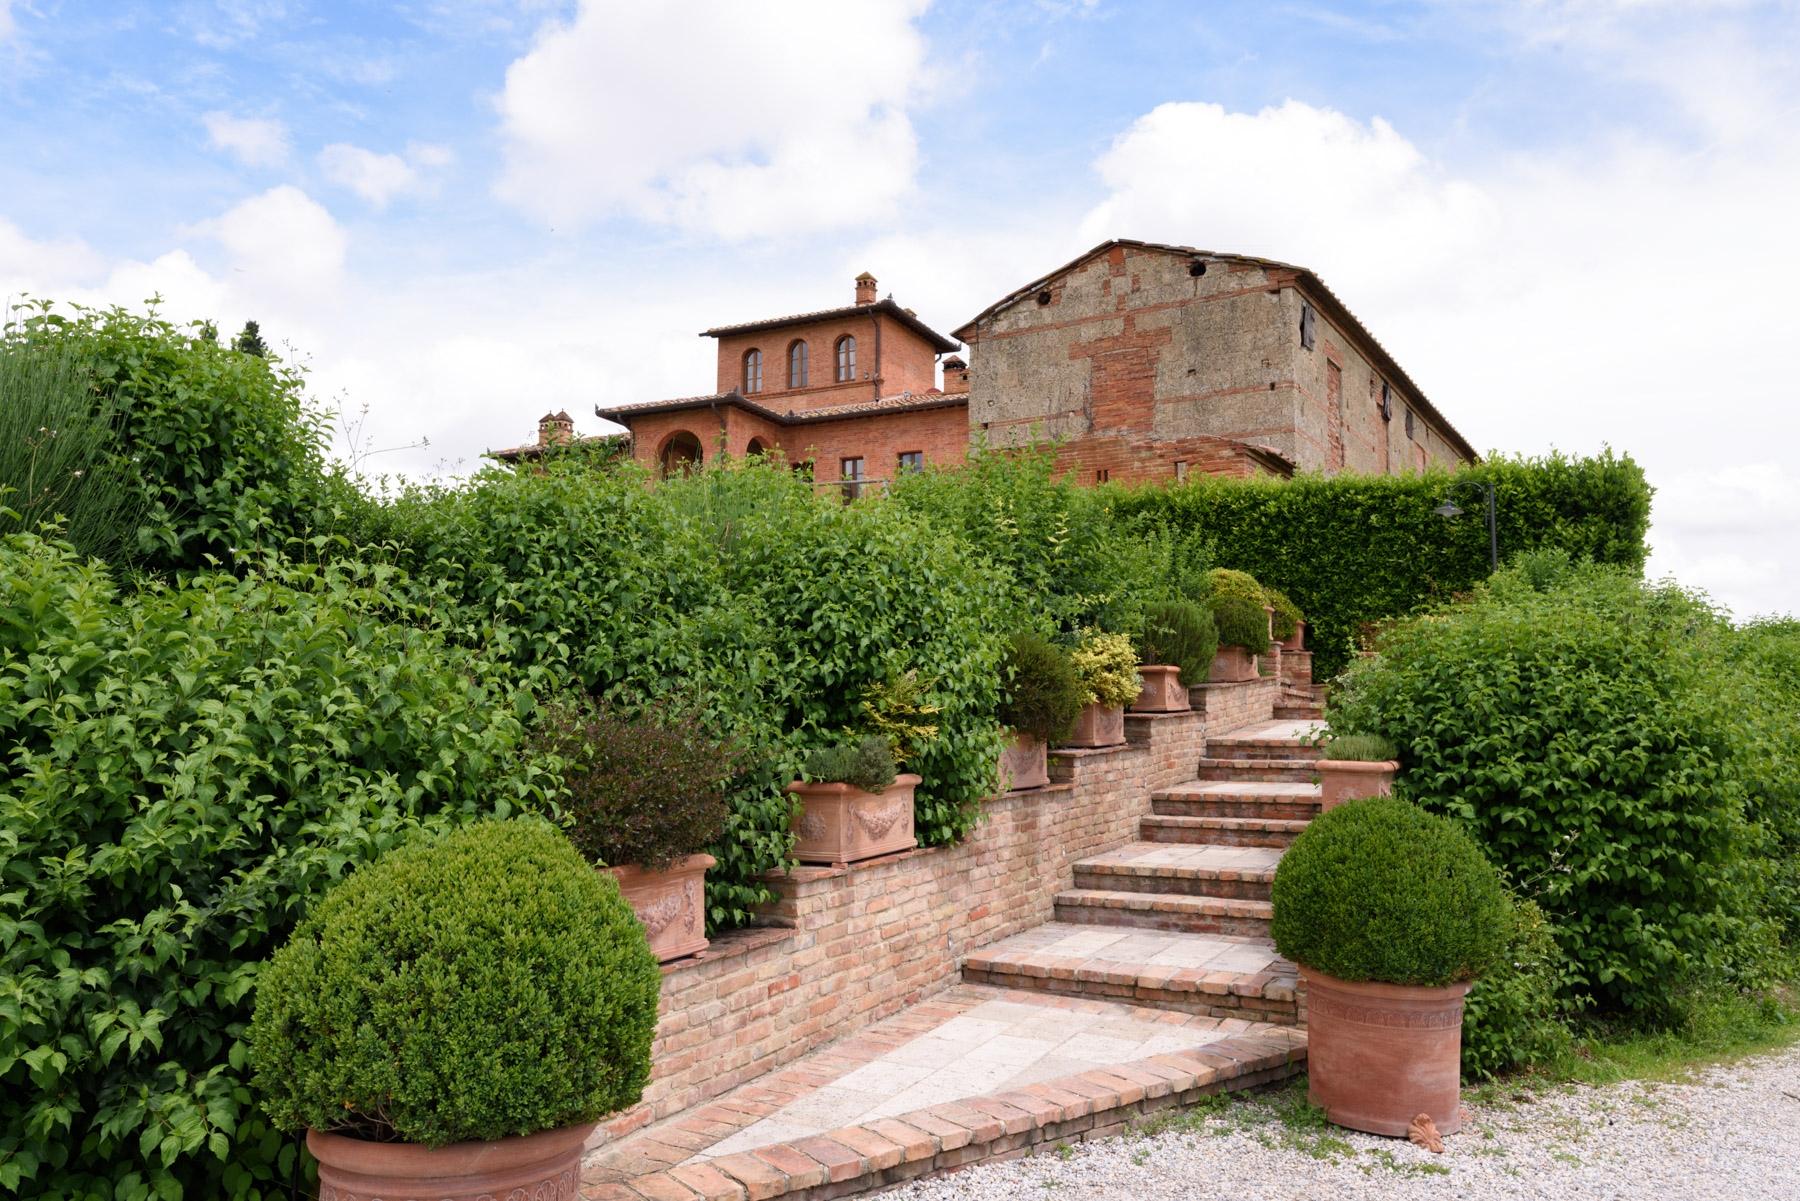 Country hotel with adjacent private villa near Siena - 14